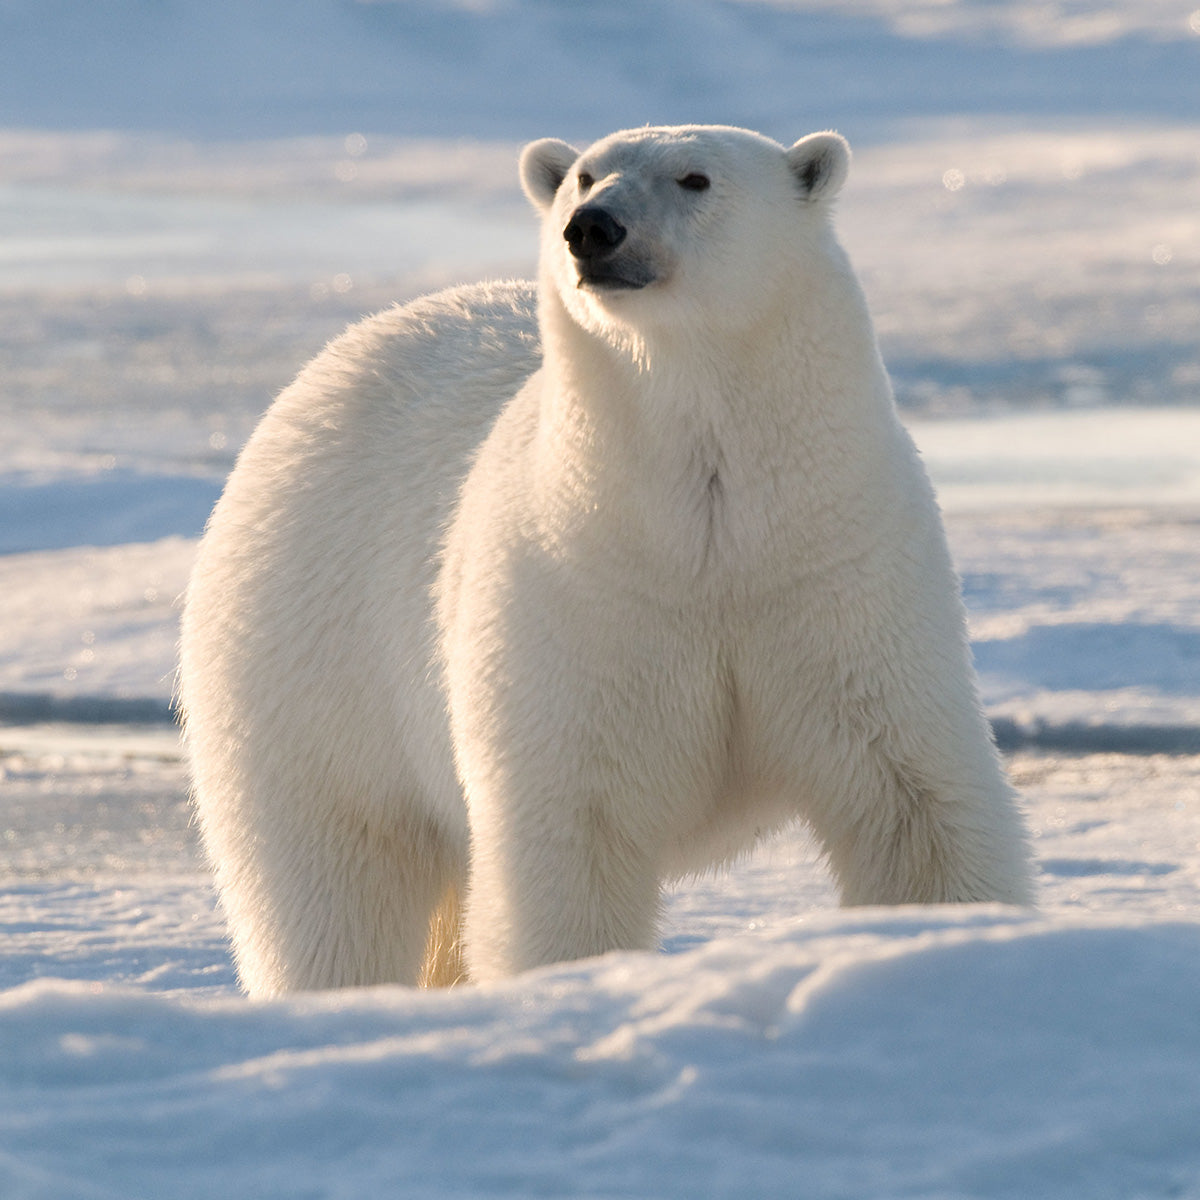 A polar bear standing in the Arctic tundra